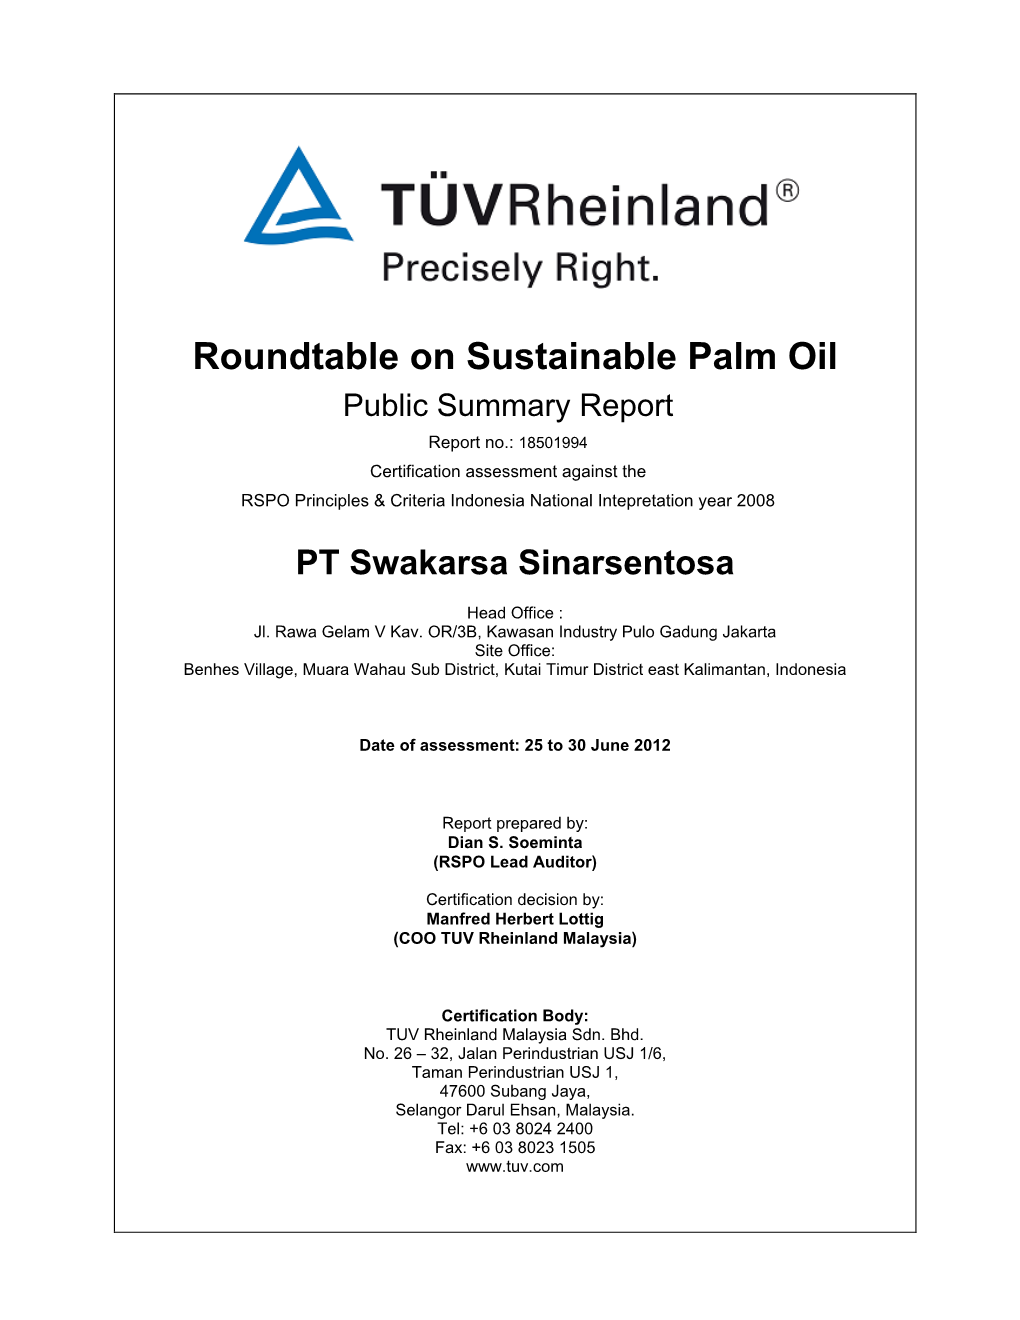 Roundtable on Sustainable Palm